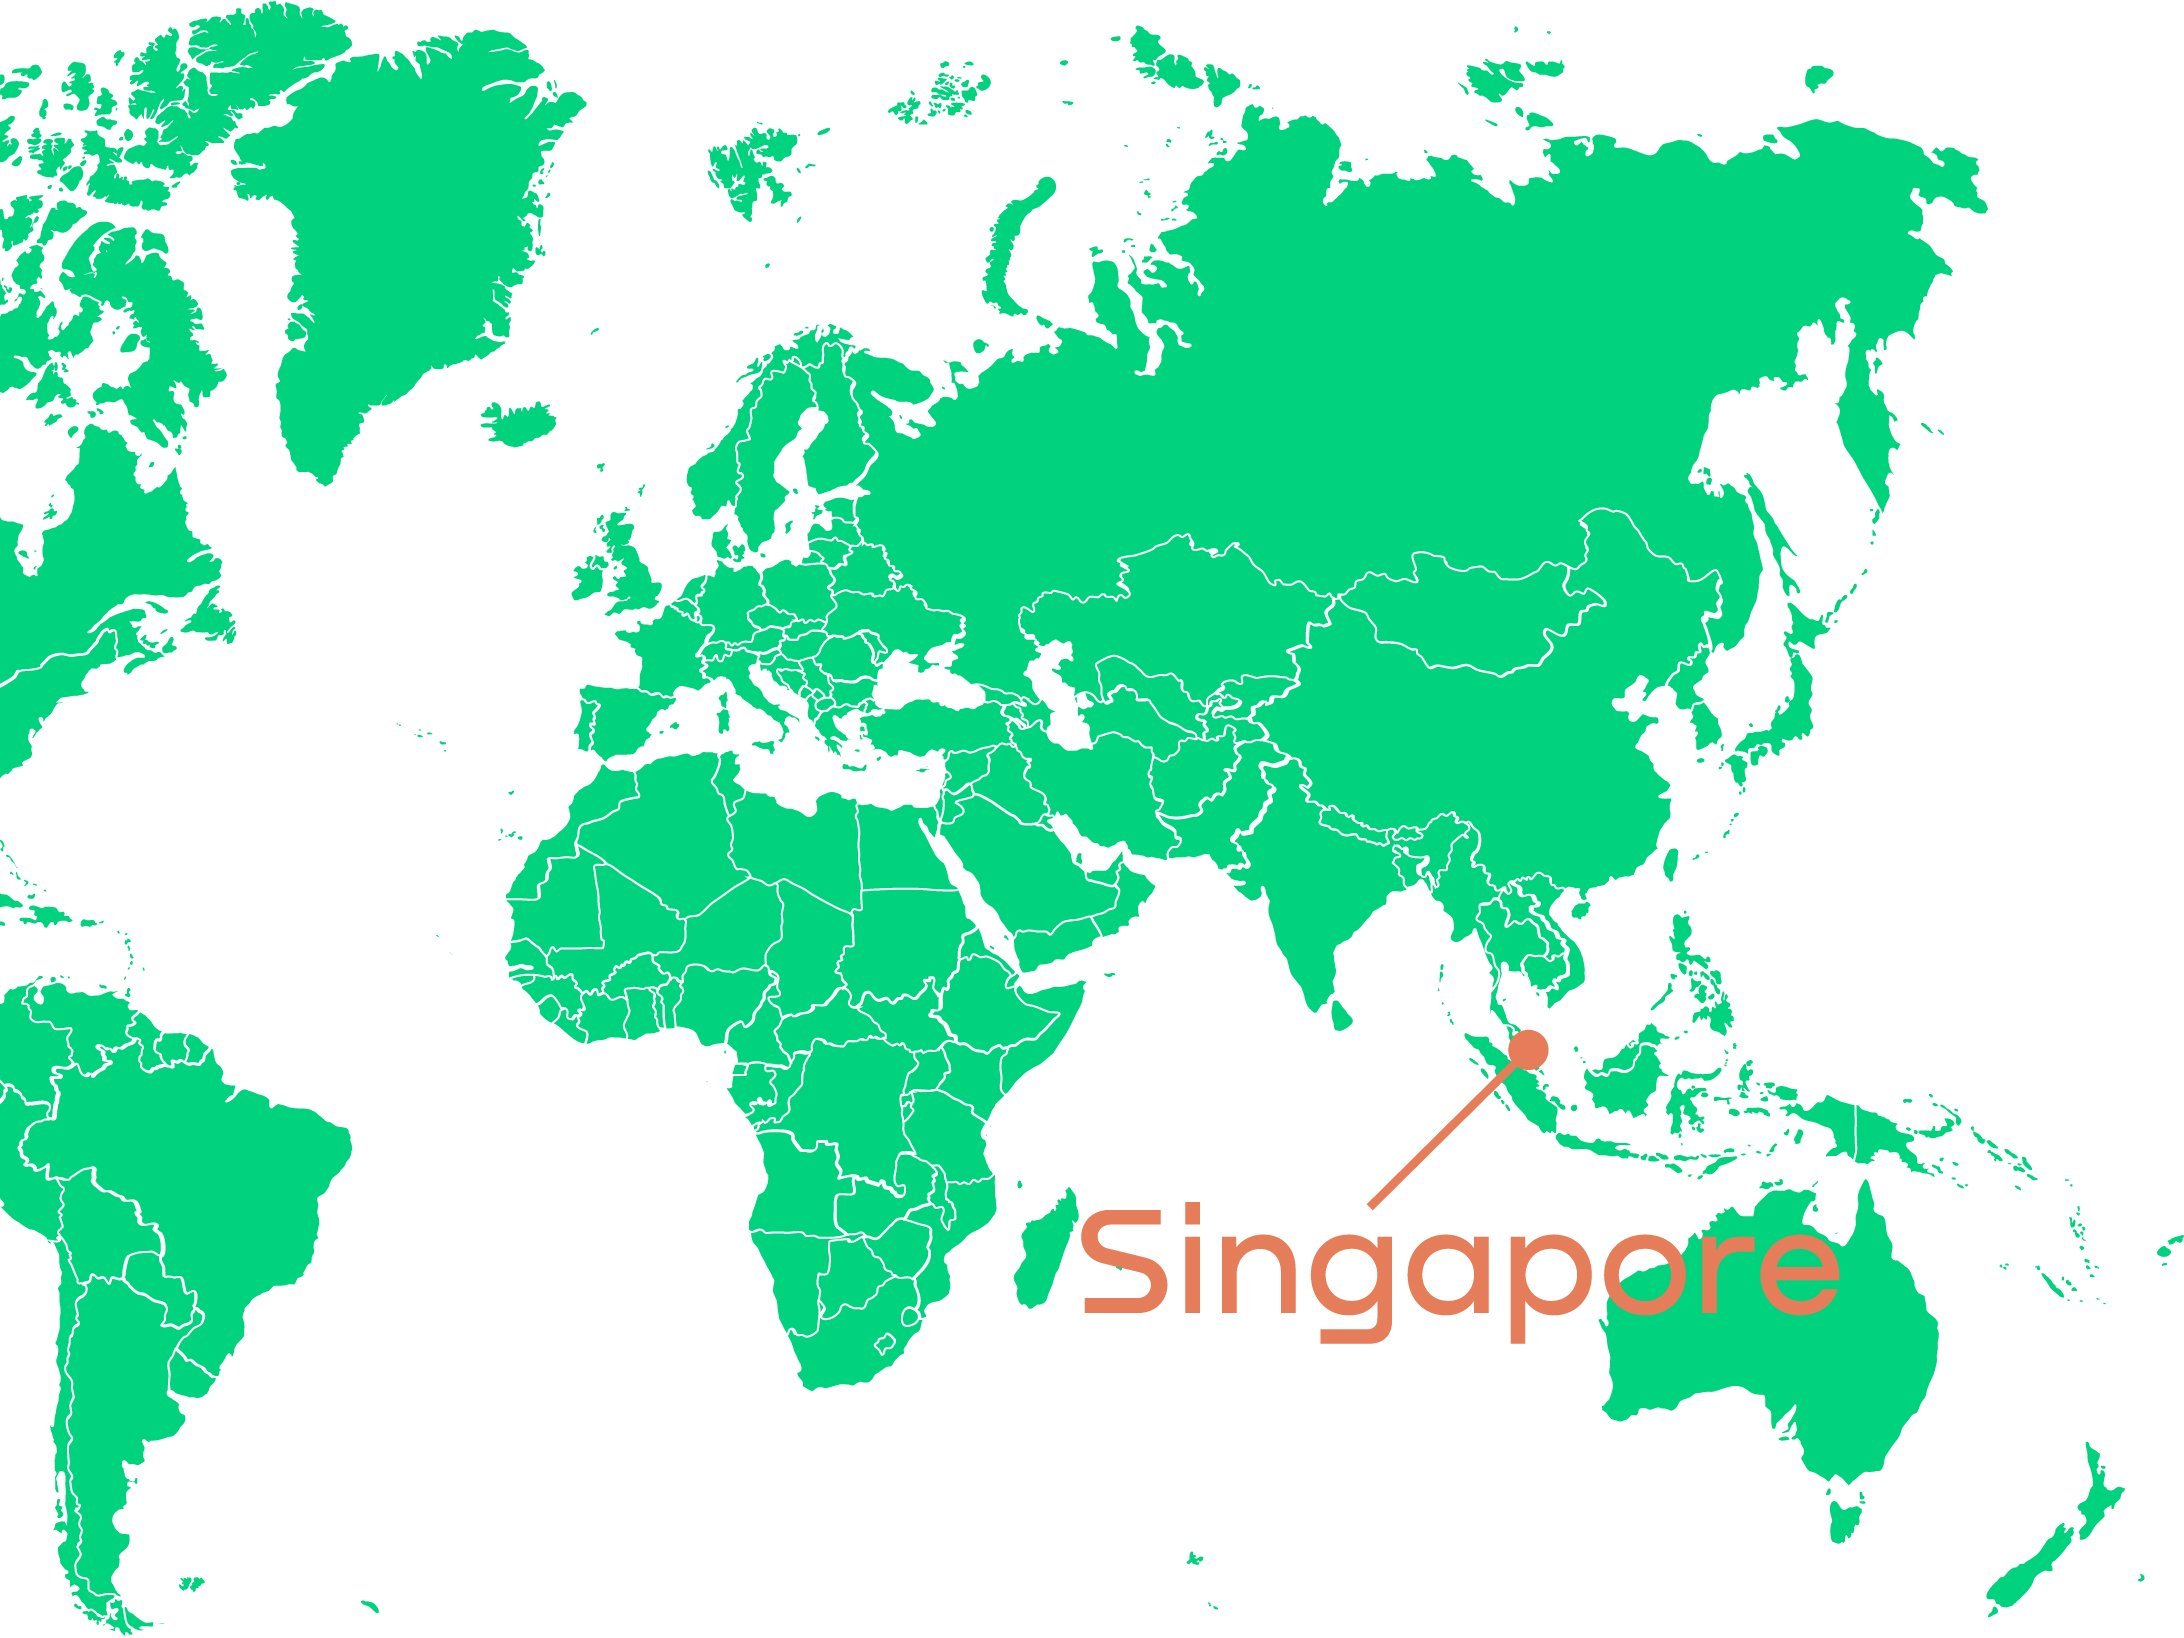 This image shows a green world map with marker on Singapore